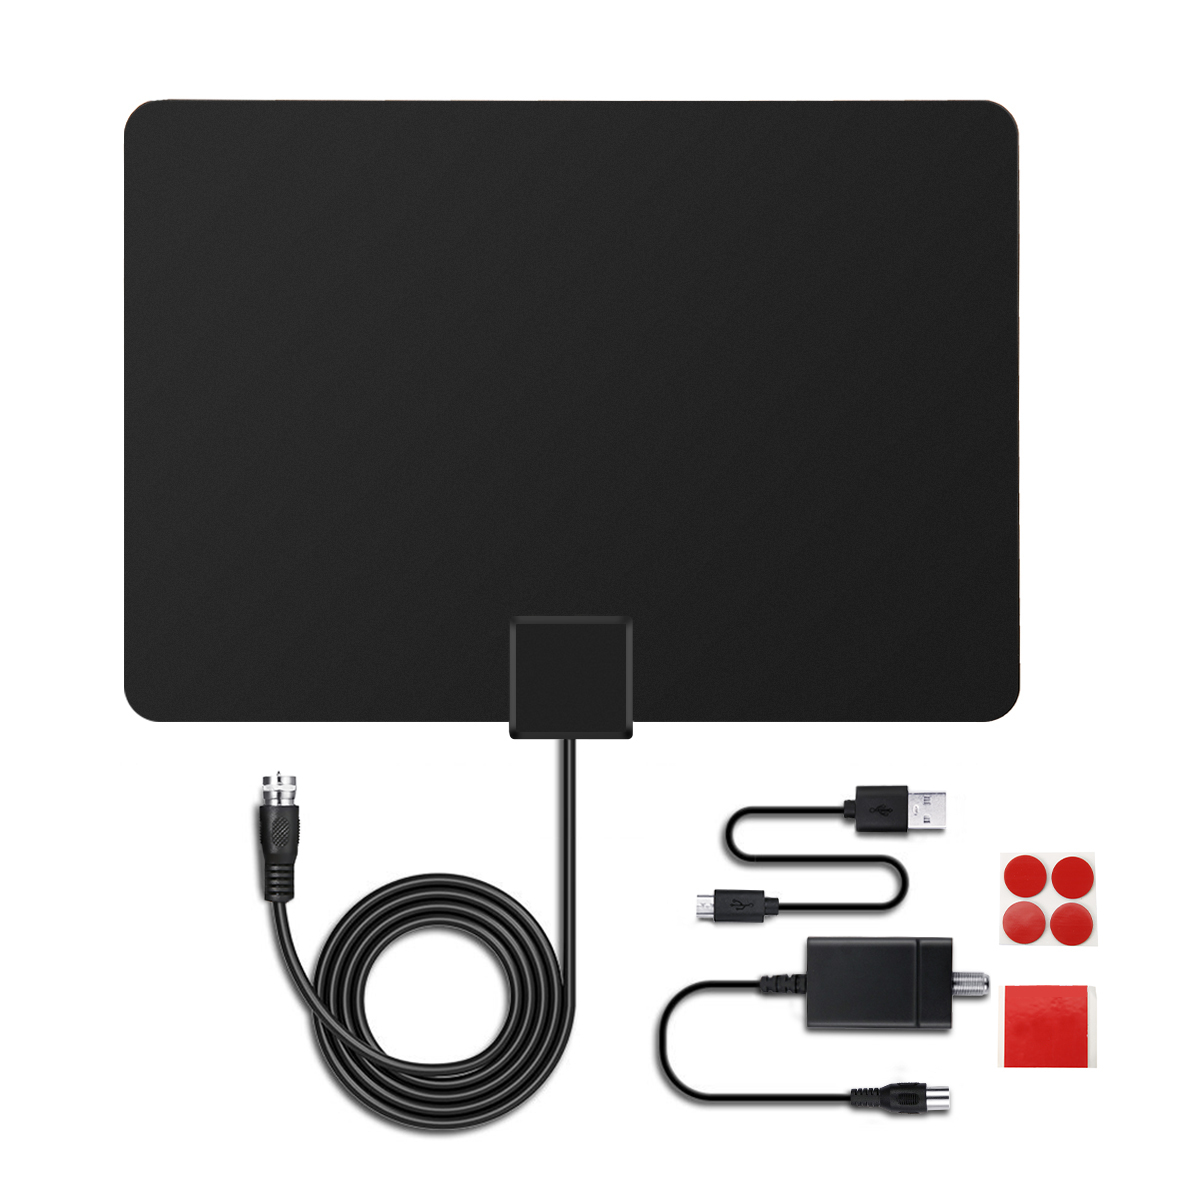 MECO-TV-Antenna-Indoor-TV-Antenna-Ultra-thin-Amplified-50-mile-digital-HDTV-antenna-with-amplifier-s-1974825-7